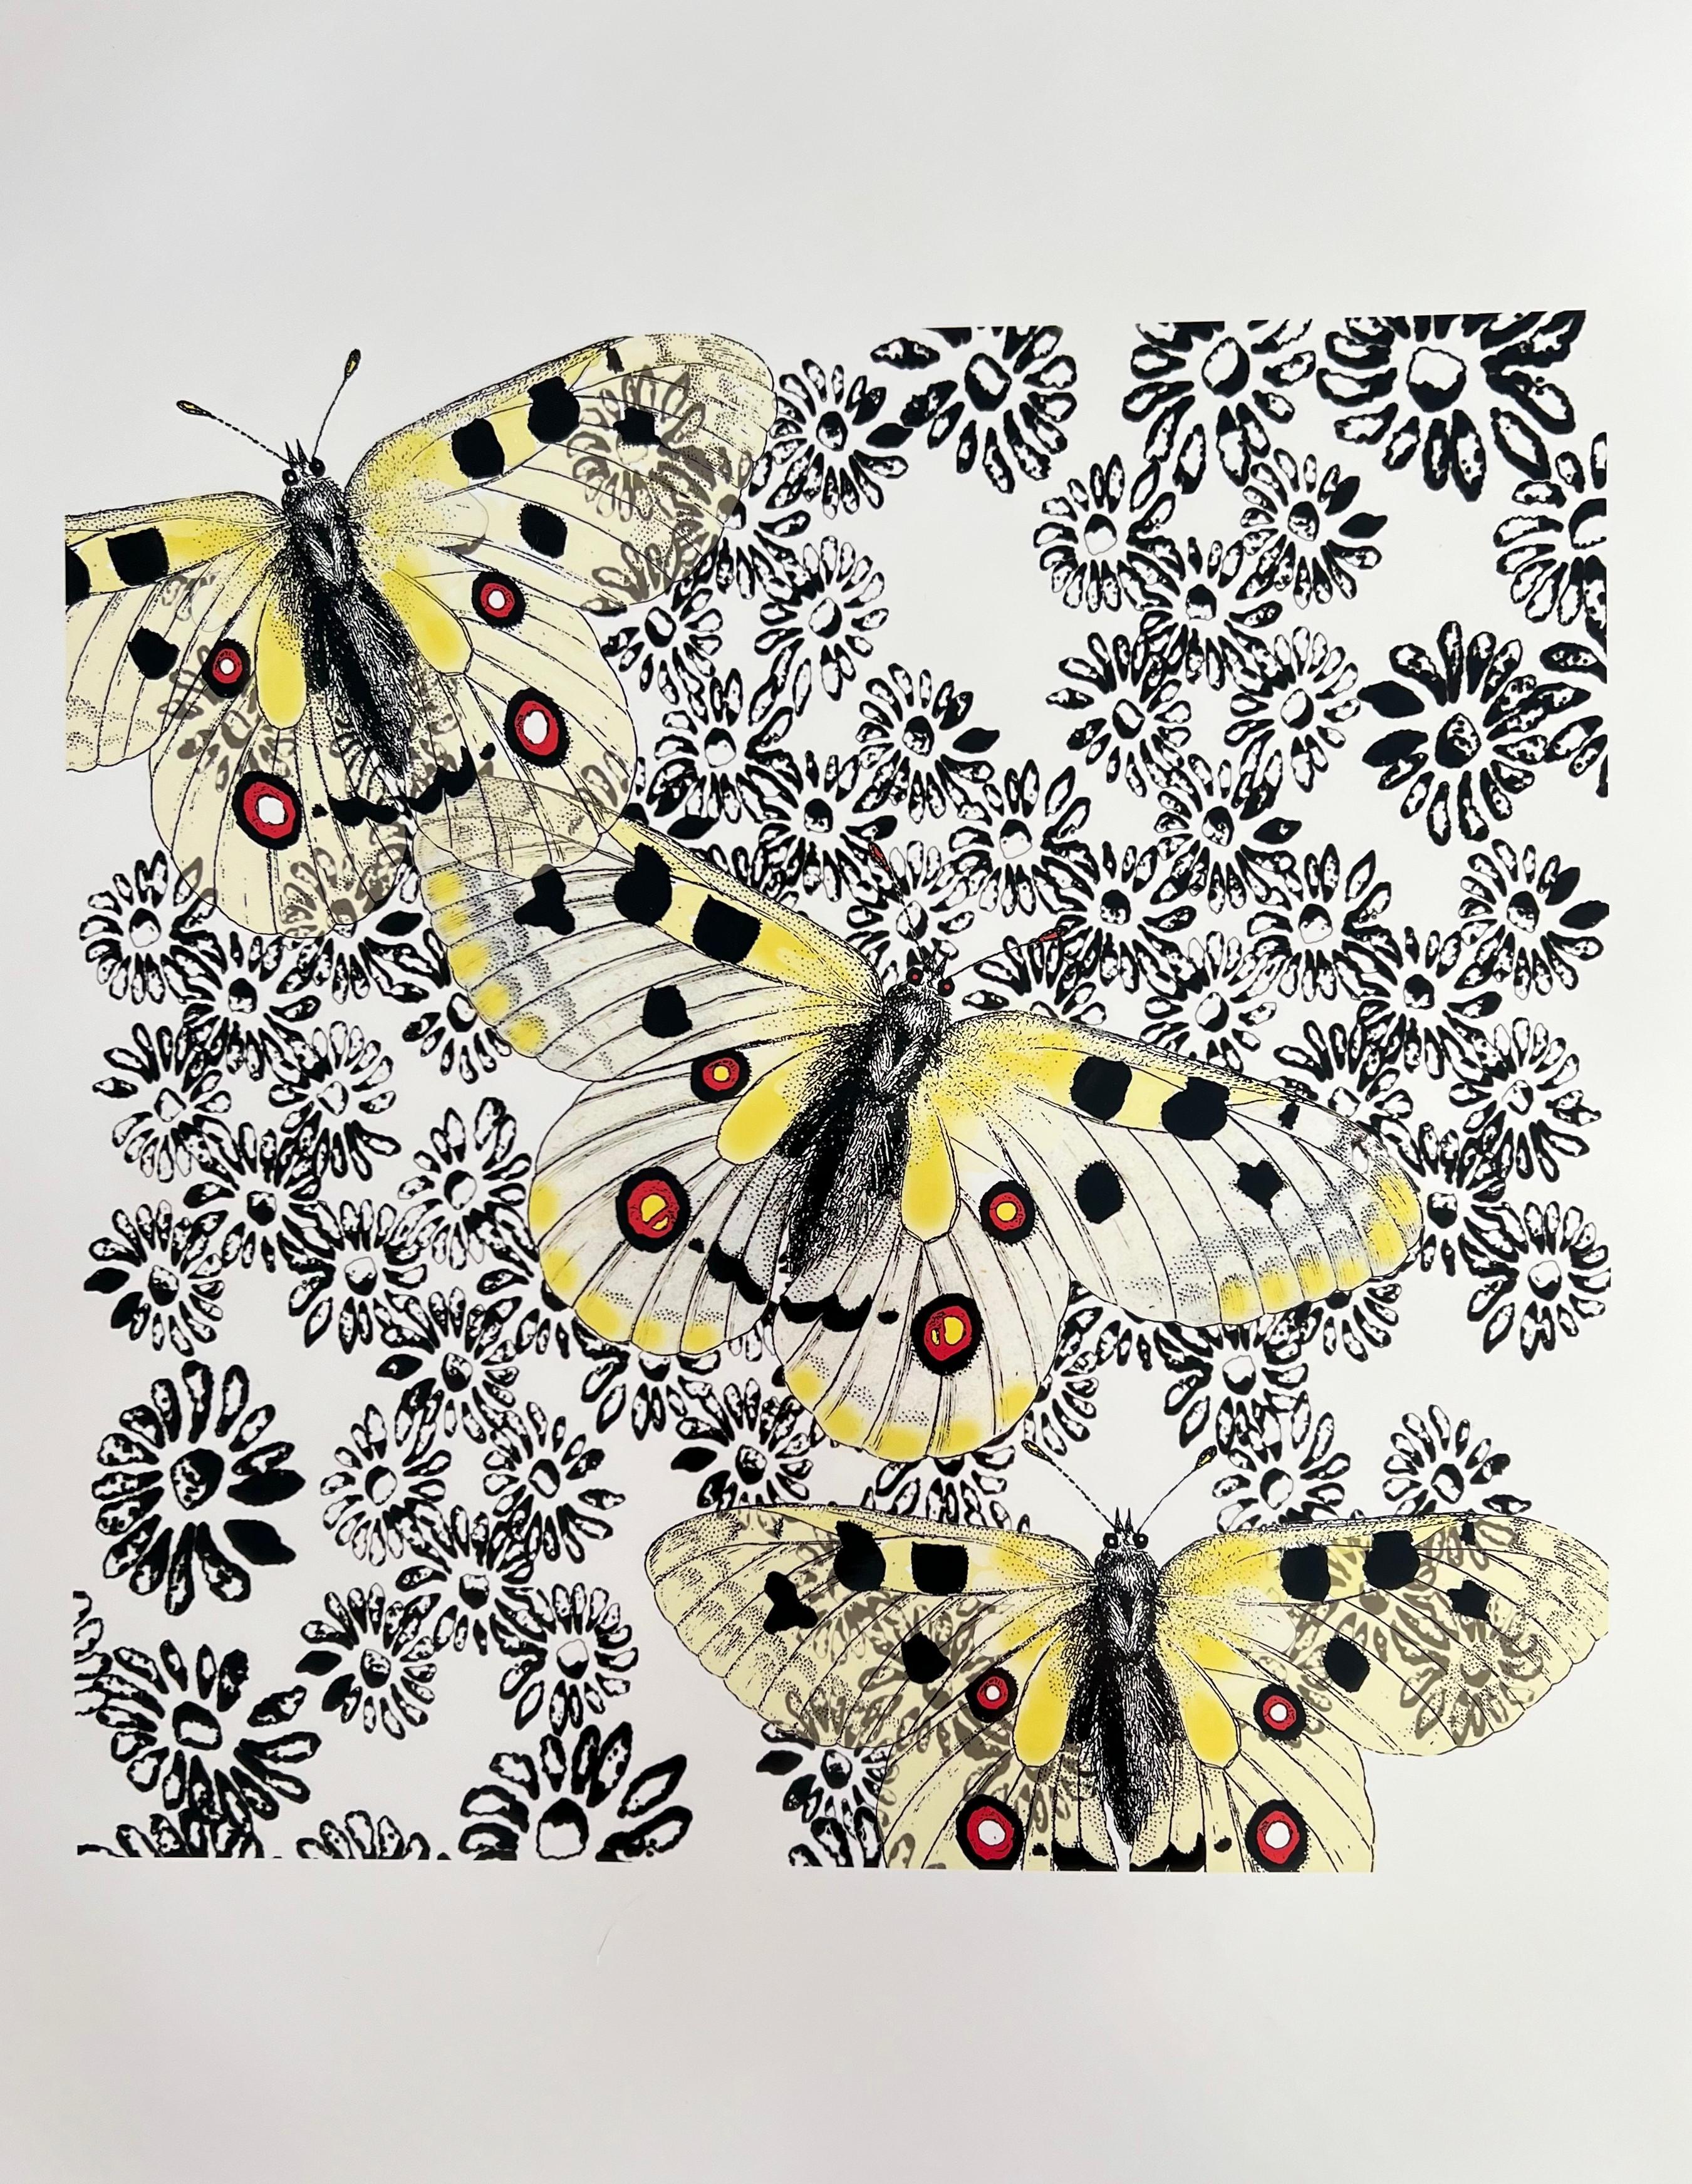 Butterflies and Daisies (Cut-out, Collage, Black & White, Patterns, Organic)